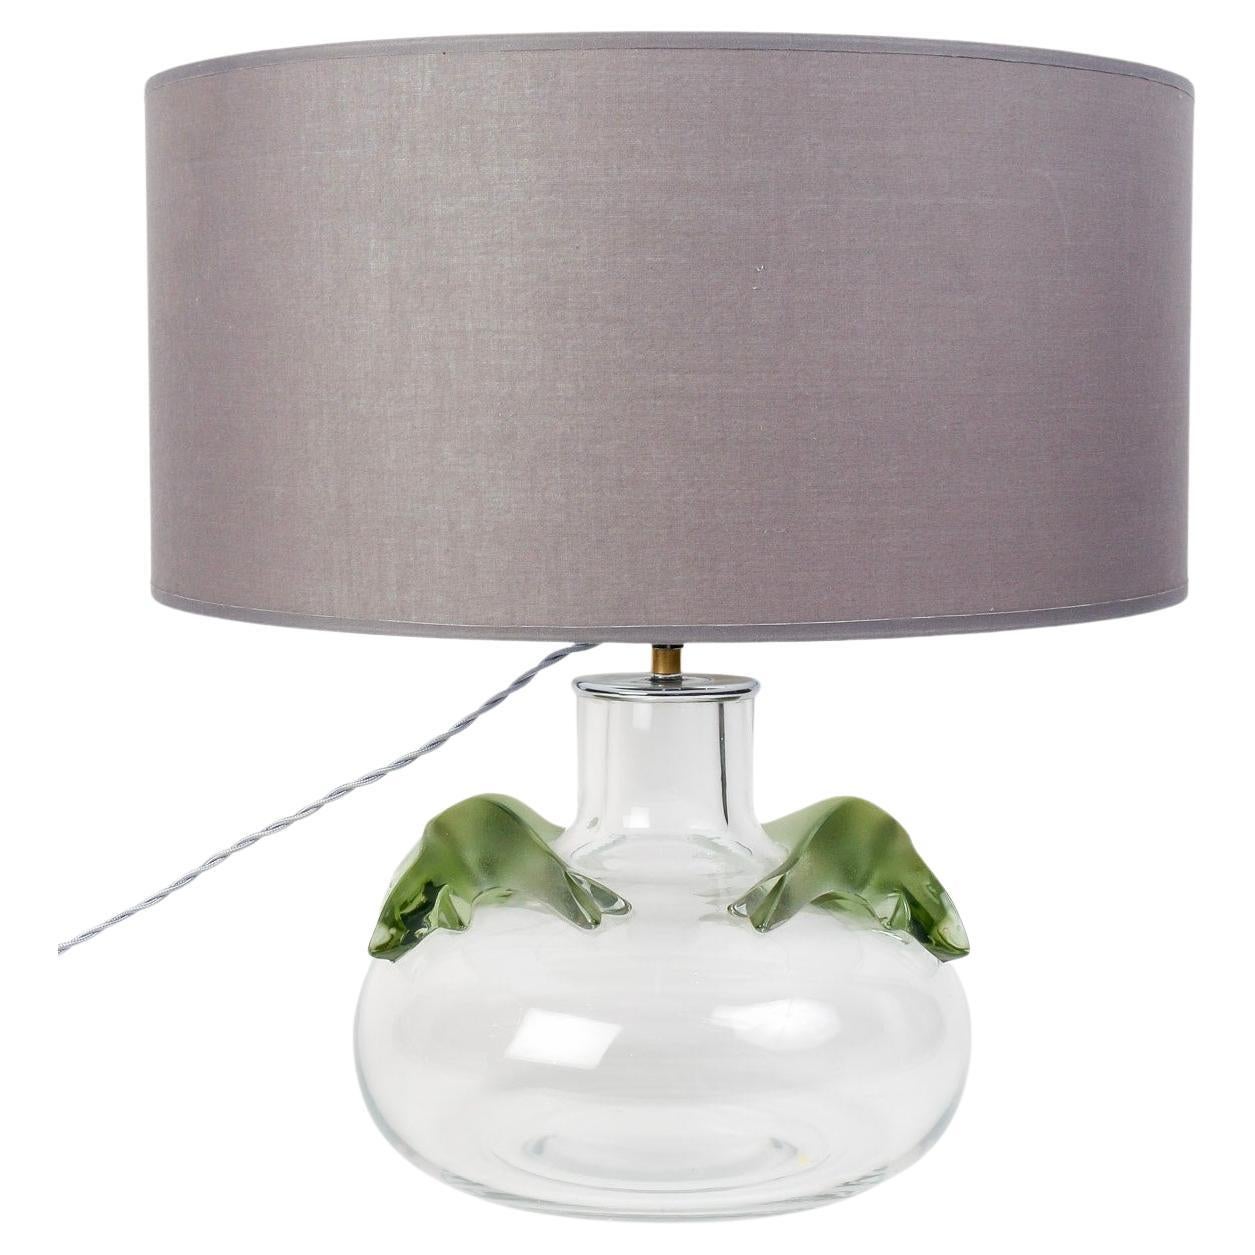 Marie Claude Lalique - Lamp Clear Crystal And Green Crystal Applies For Sale